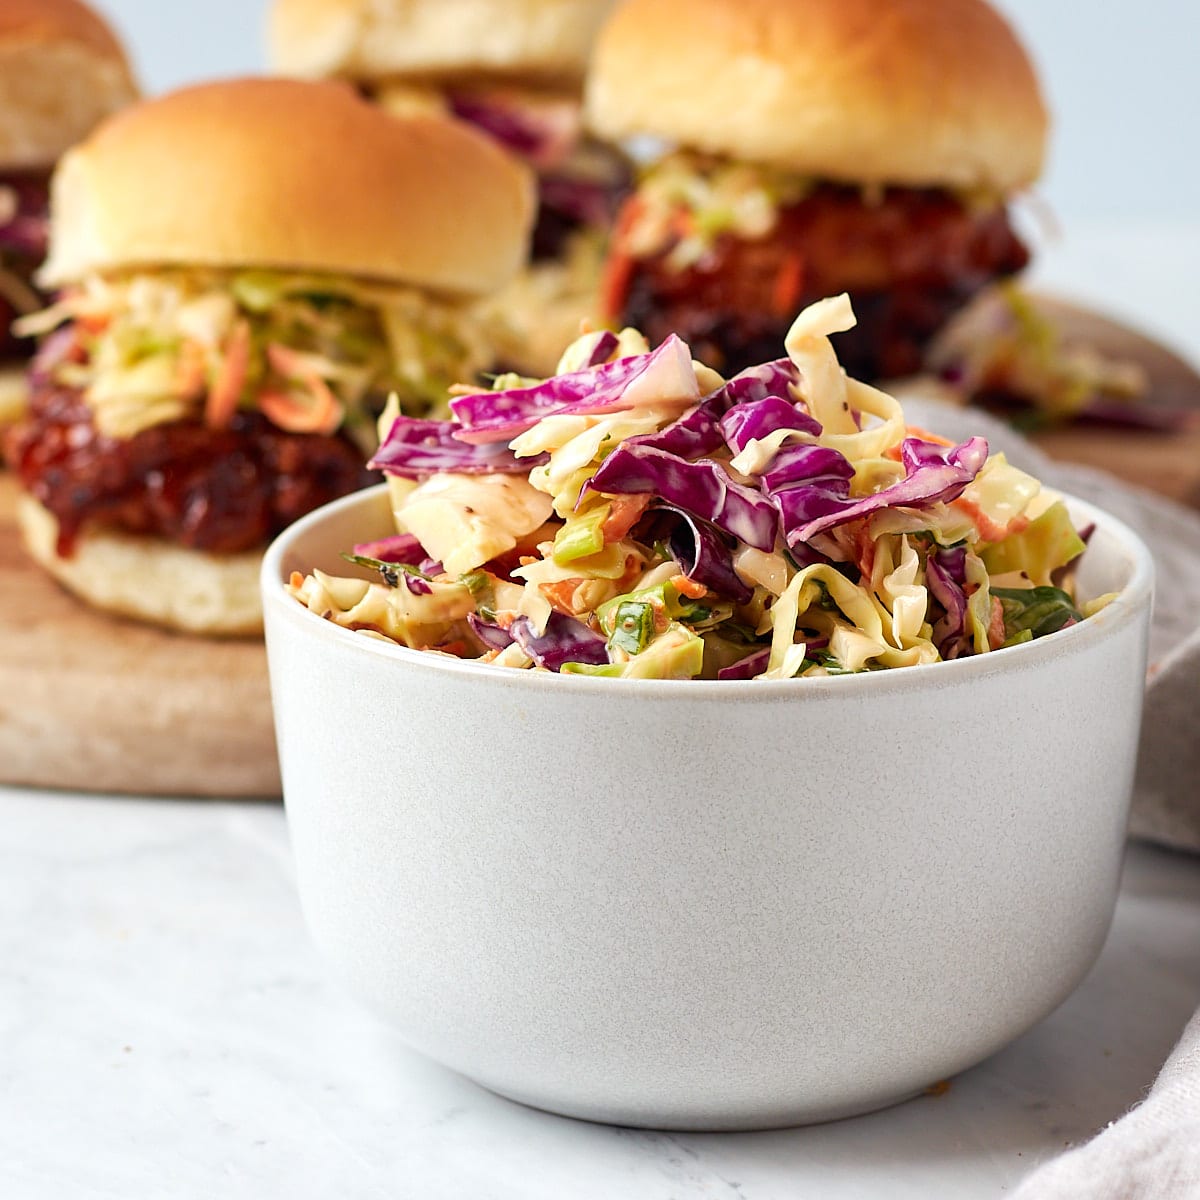 coleslaw in a bowl with chicken sandwiches in the background that were topped with slaw.